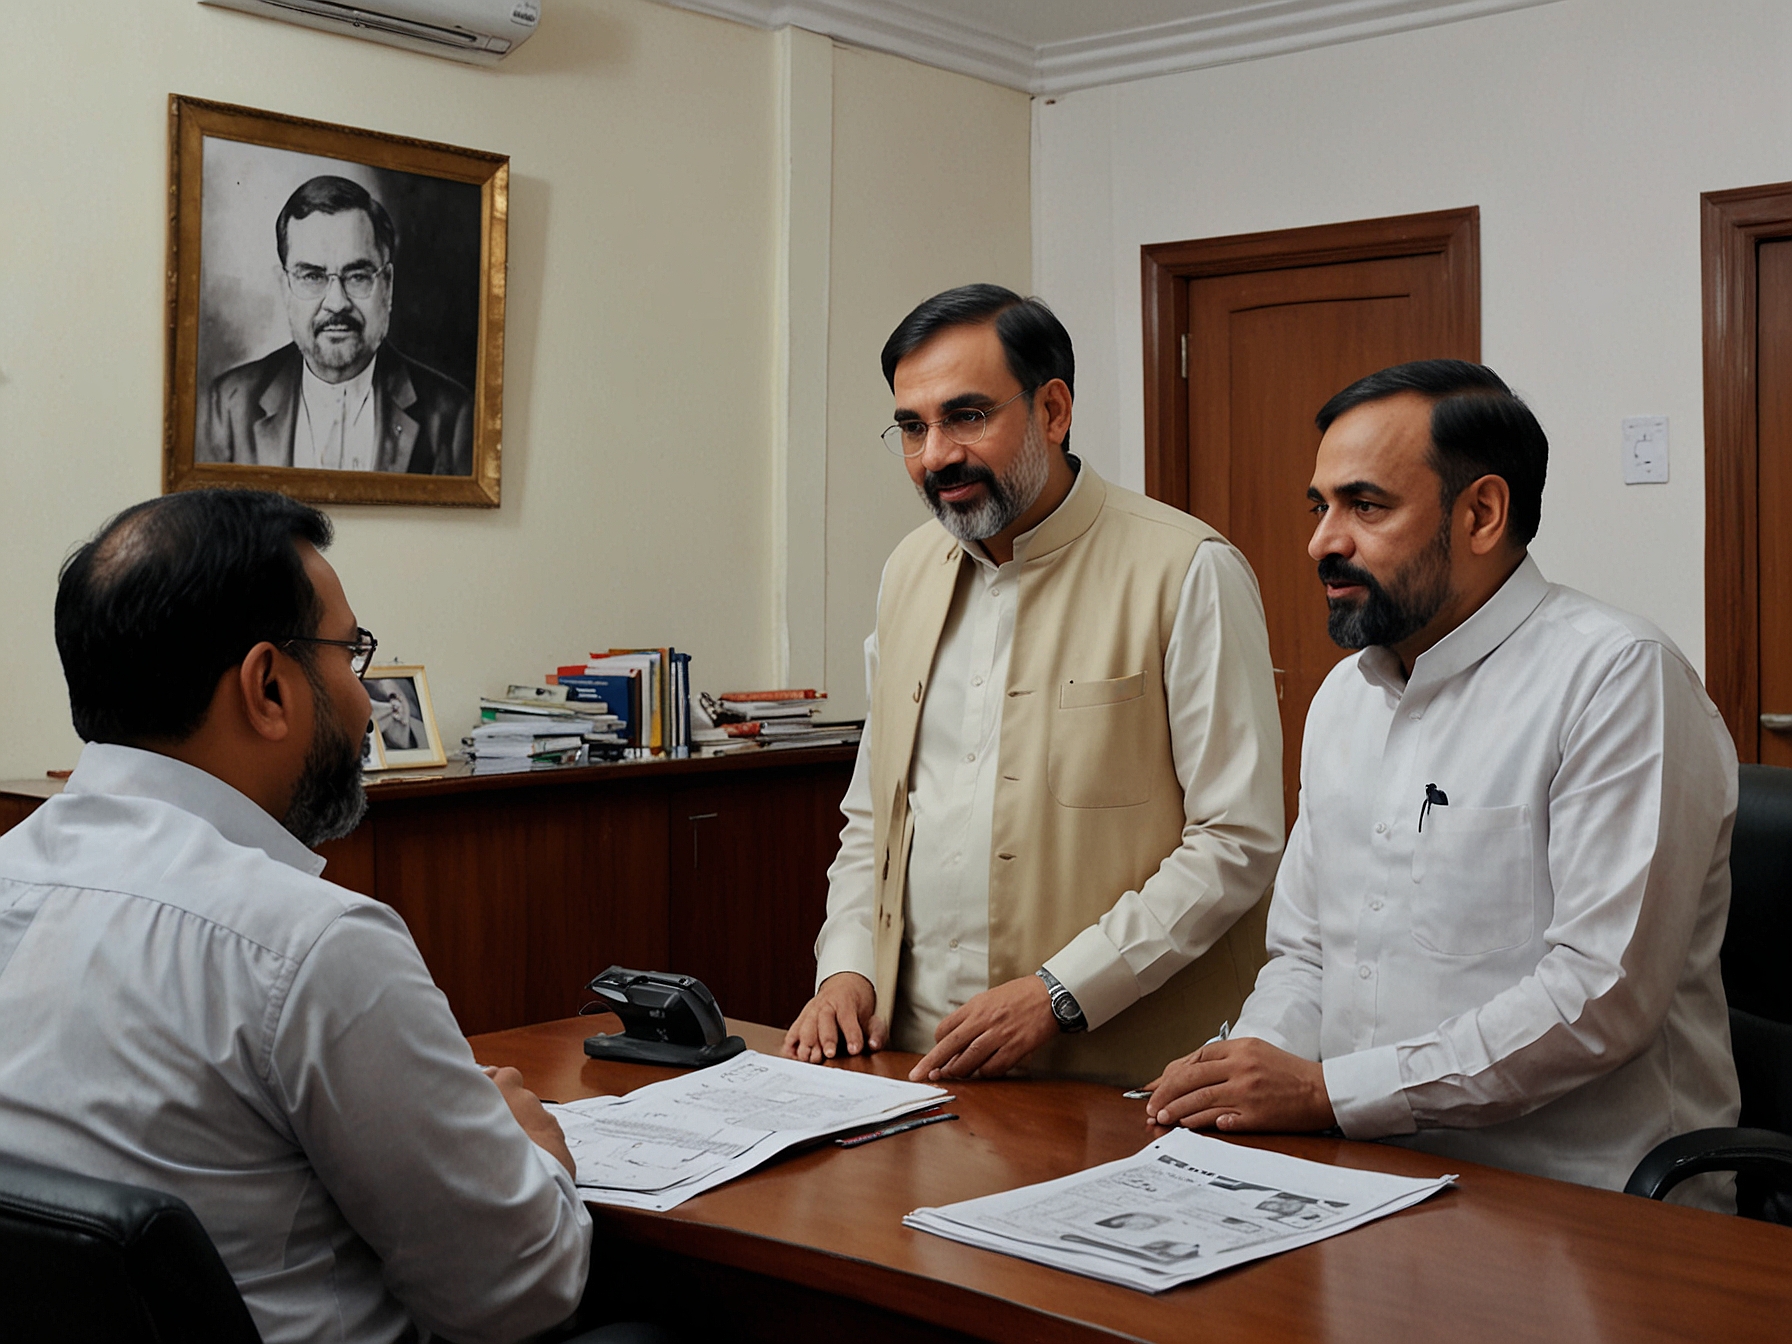 Delhi's environment minister, Gopal Rai, in a meeting with representatives from the Delhi Petrol Dealers Association, discussing the PUCC fee and assuring them of solutions.